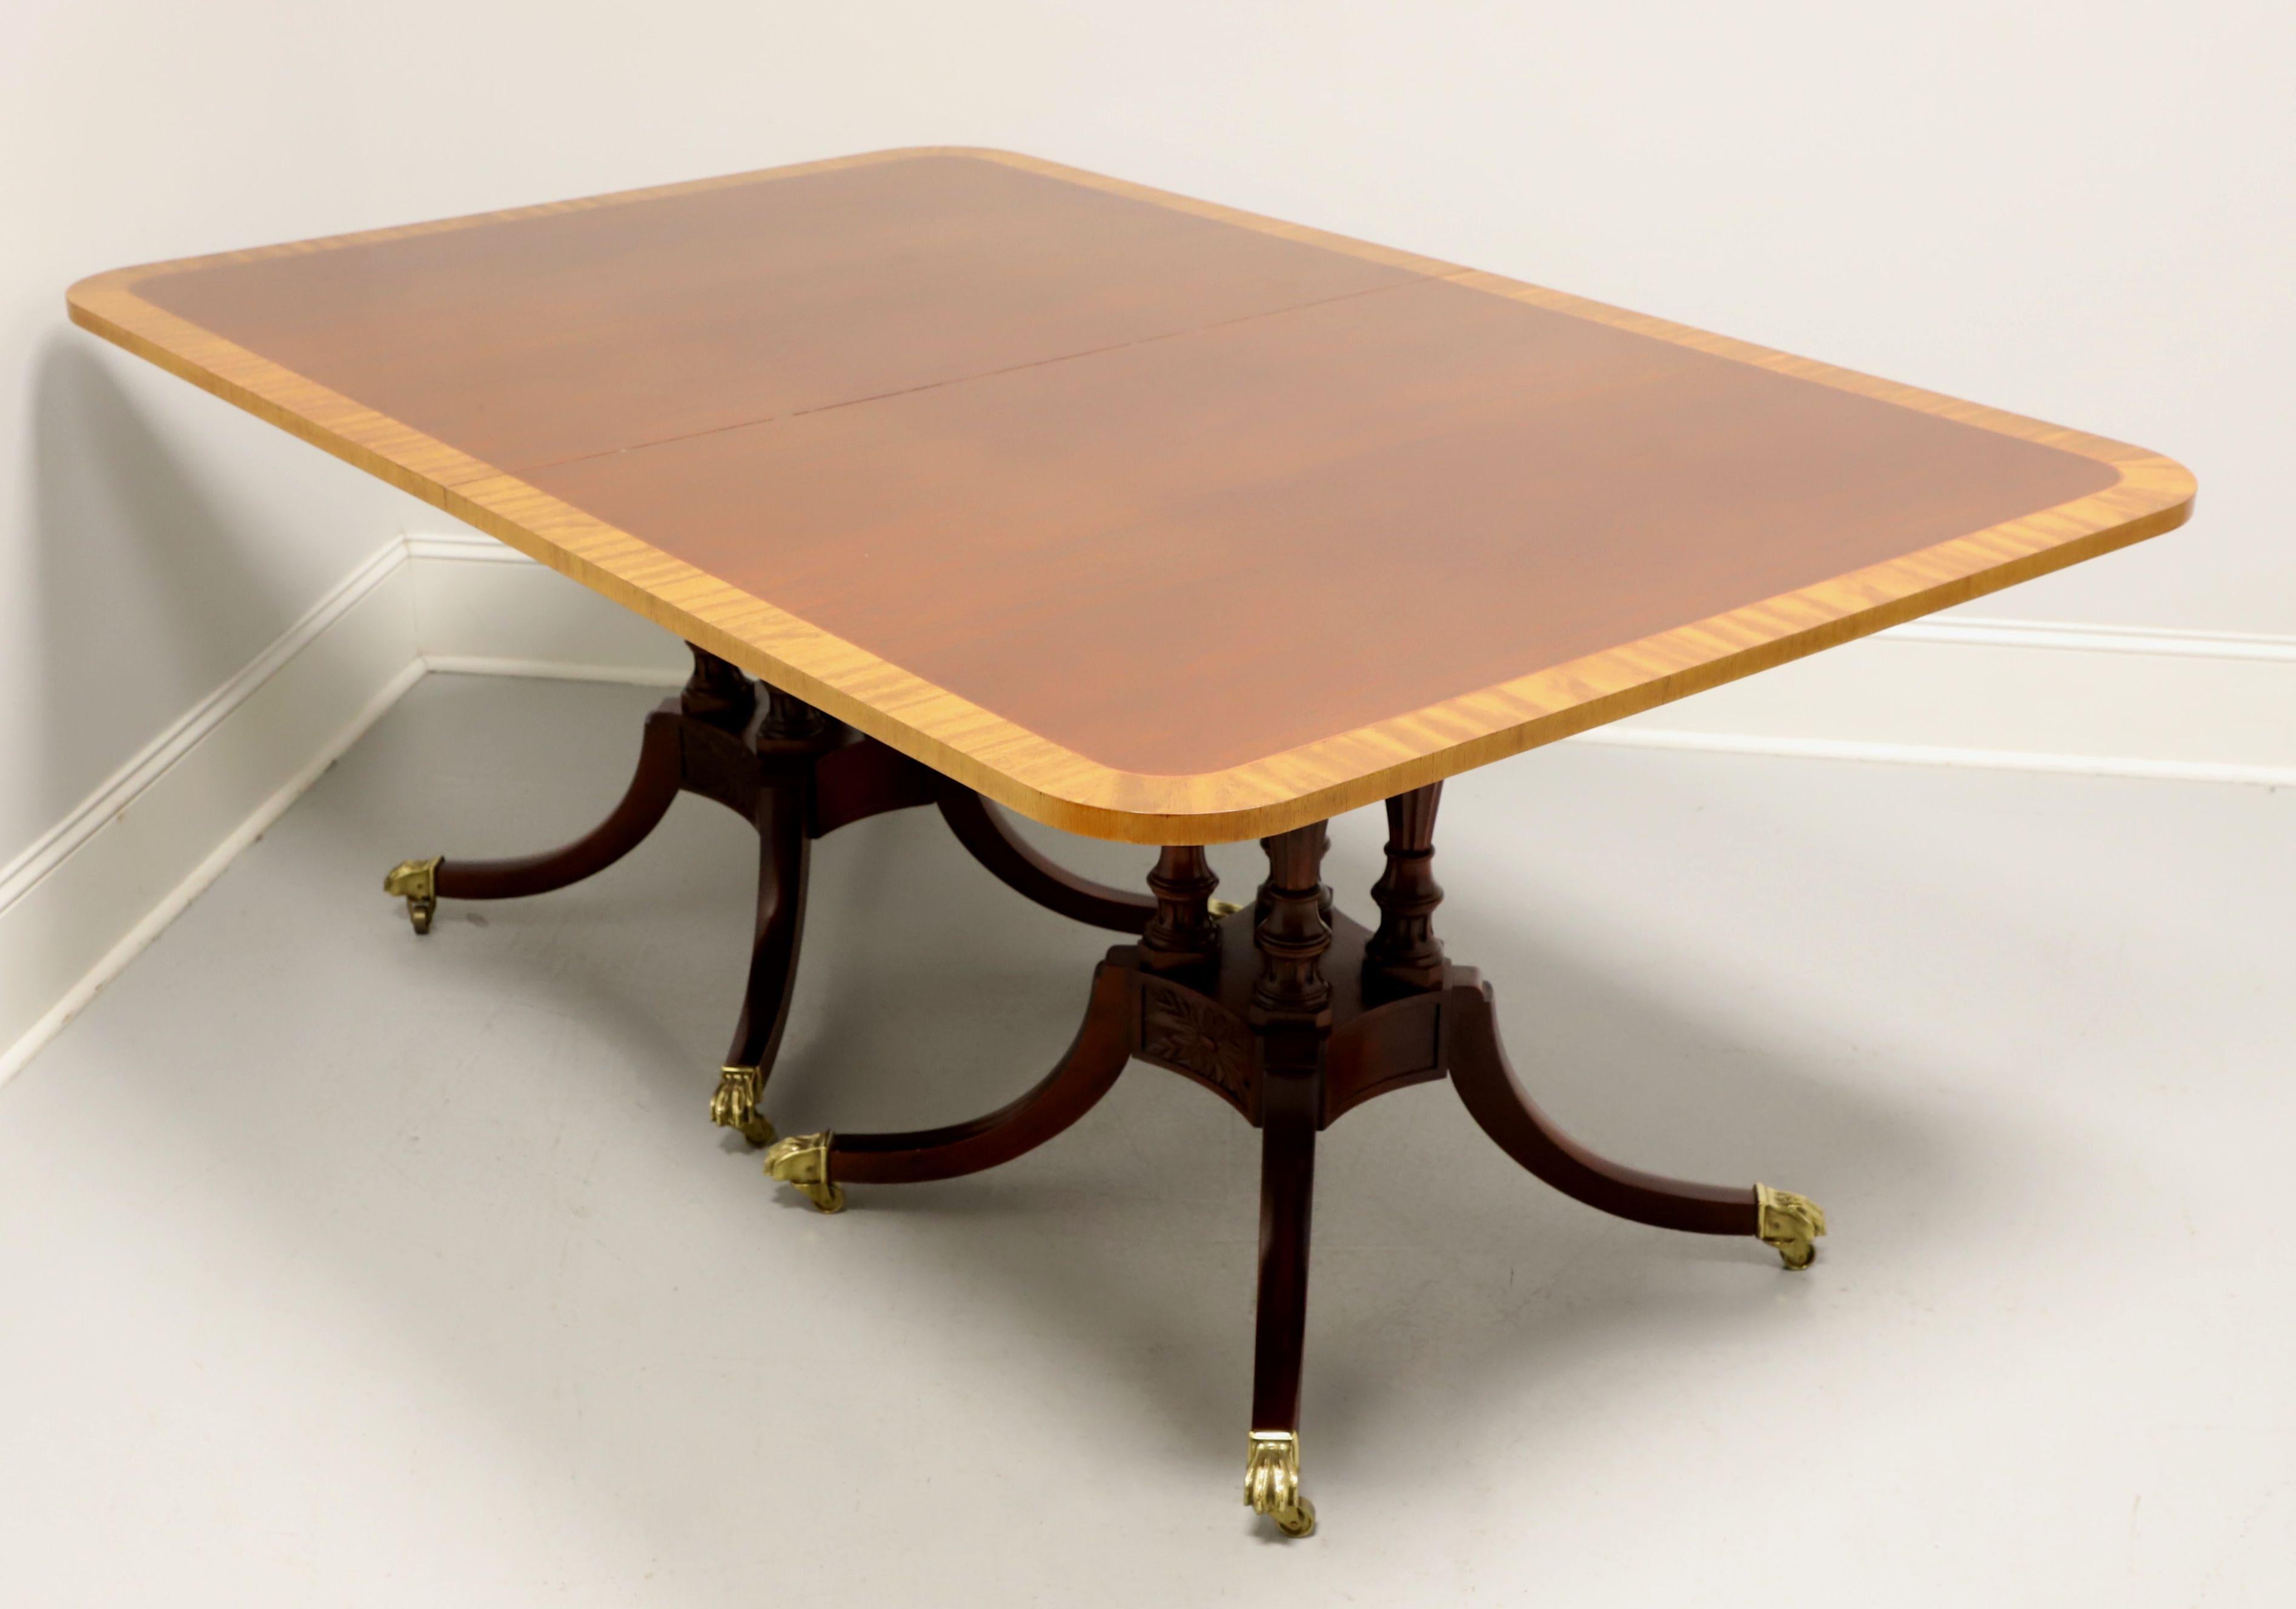 A Regency style double pedestal dining table by Baker Furniture, from their Historic Charleston Reproductions Collection. Mahogany with satinwood banding to top & edge, decoratively carved birdcage double pedestals with four legs, brass paw toe caps